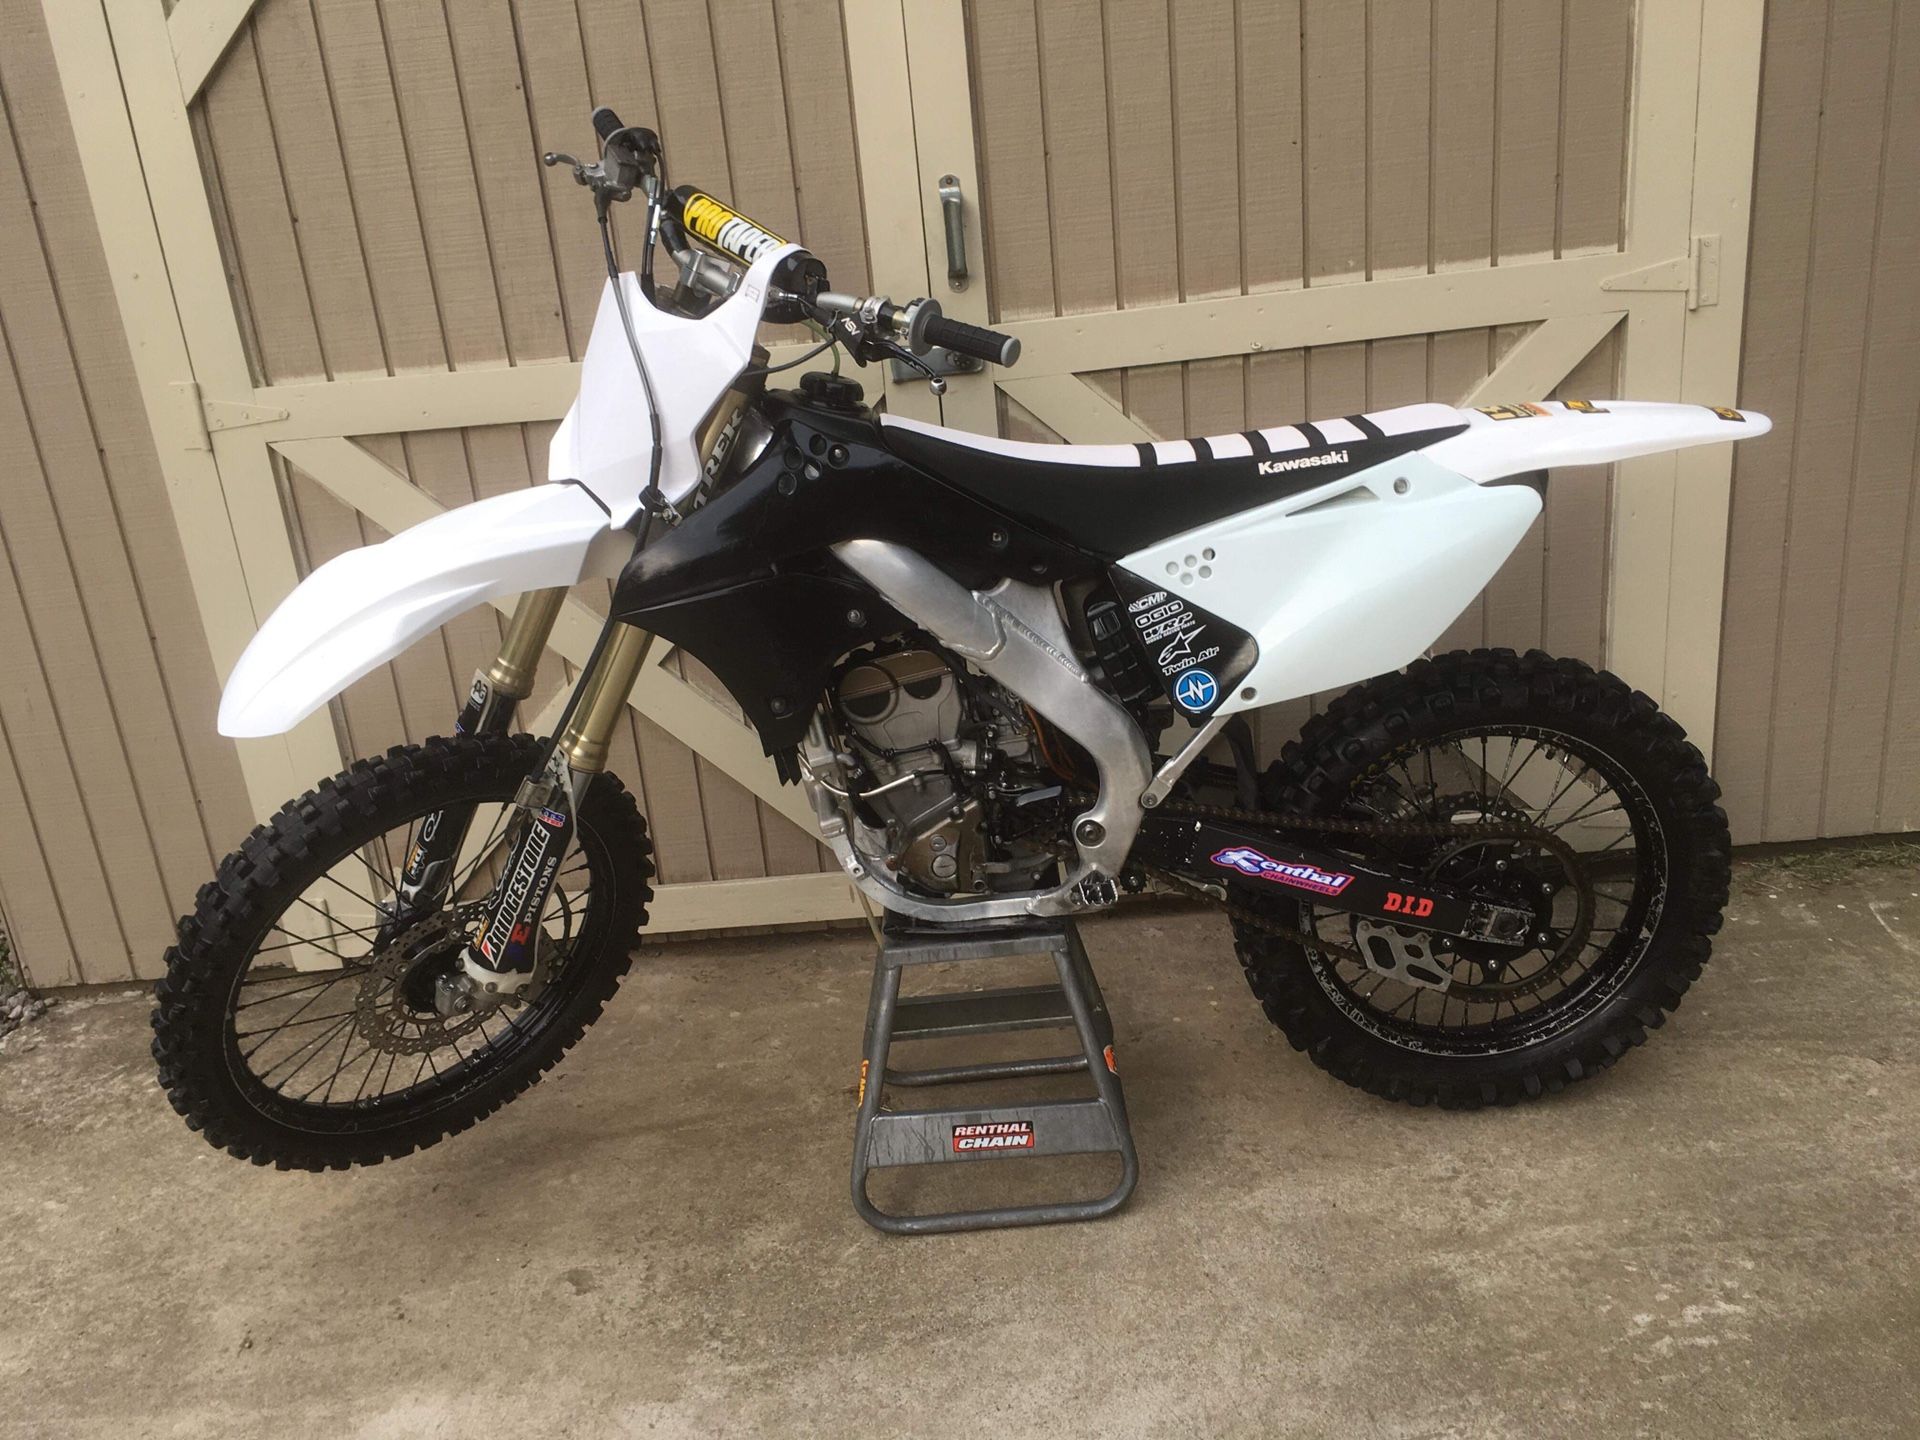 Kx250f for sale